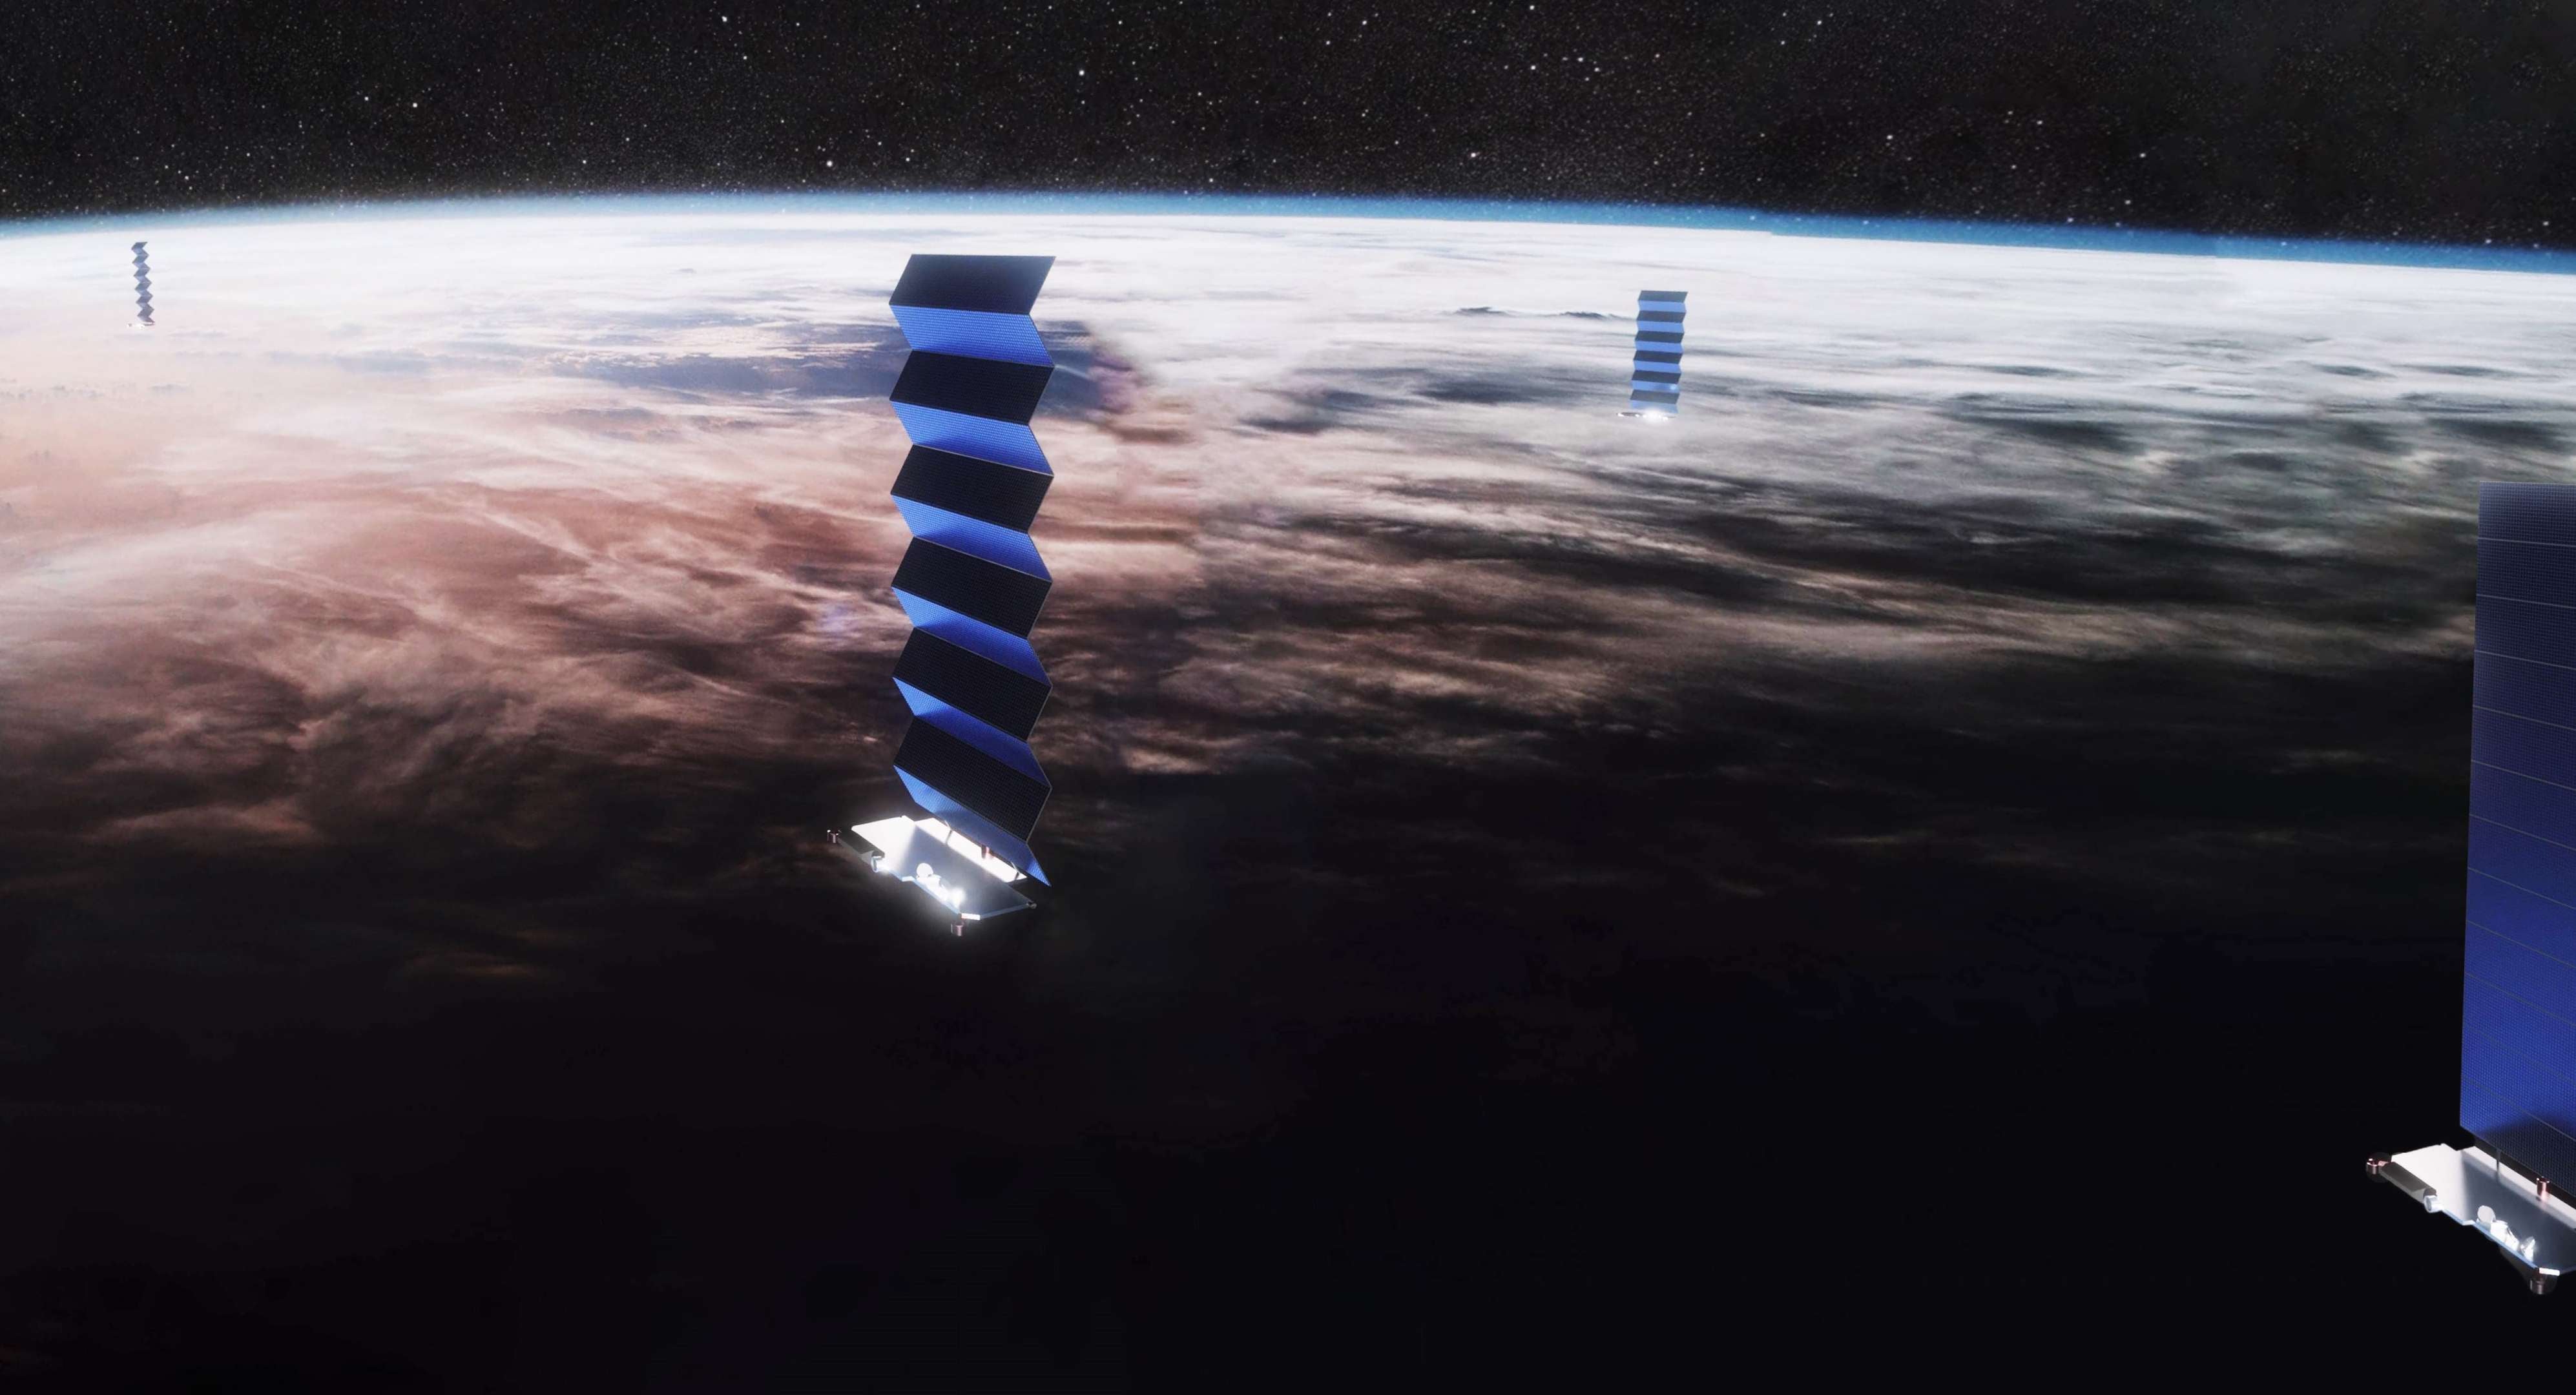 Federal Communications Commission Approves SpaceX's Plan To Deploy Starlink Satellites At Lower Orbits